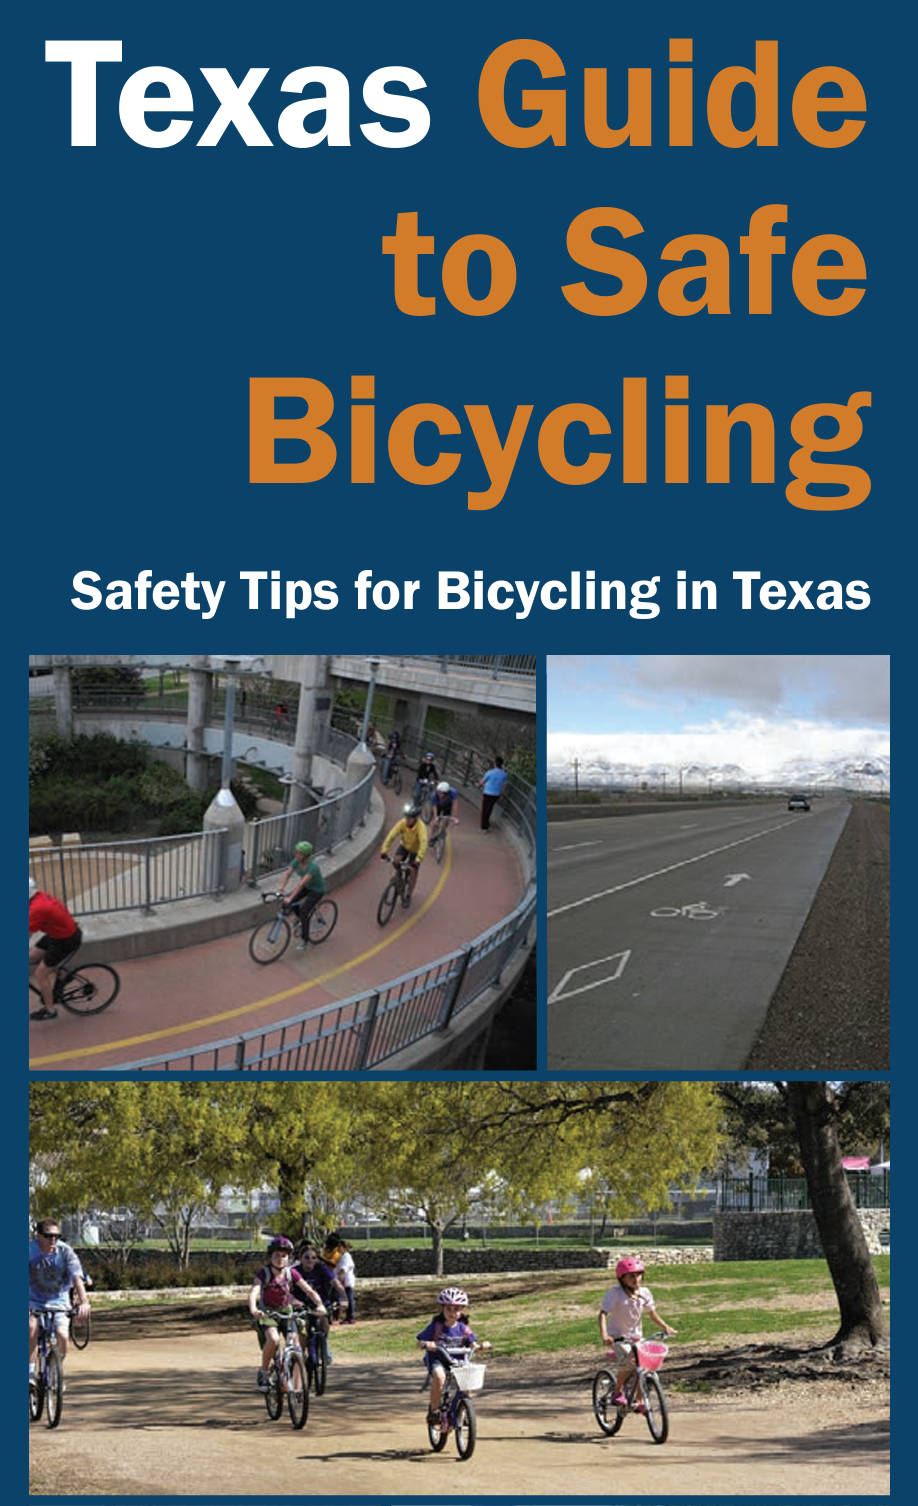 Texas Guide to Safe Bicycling